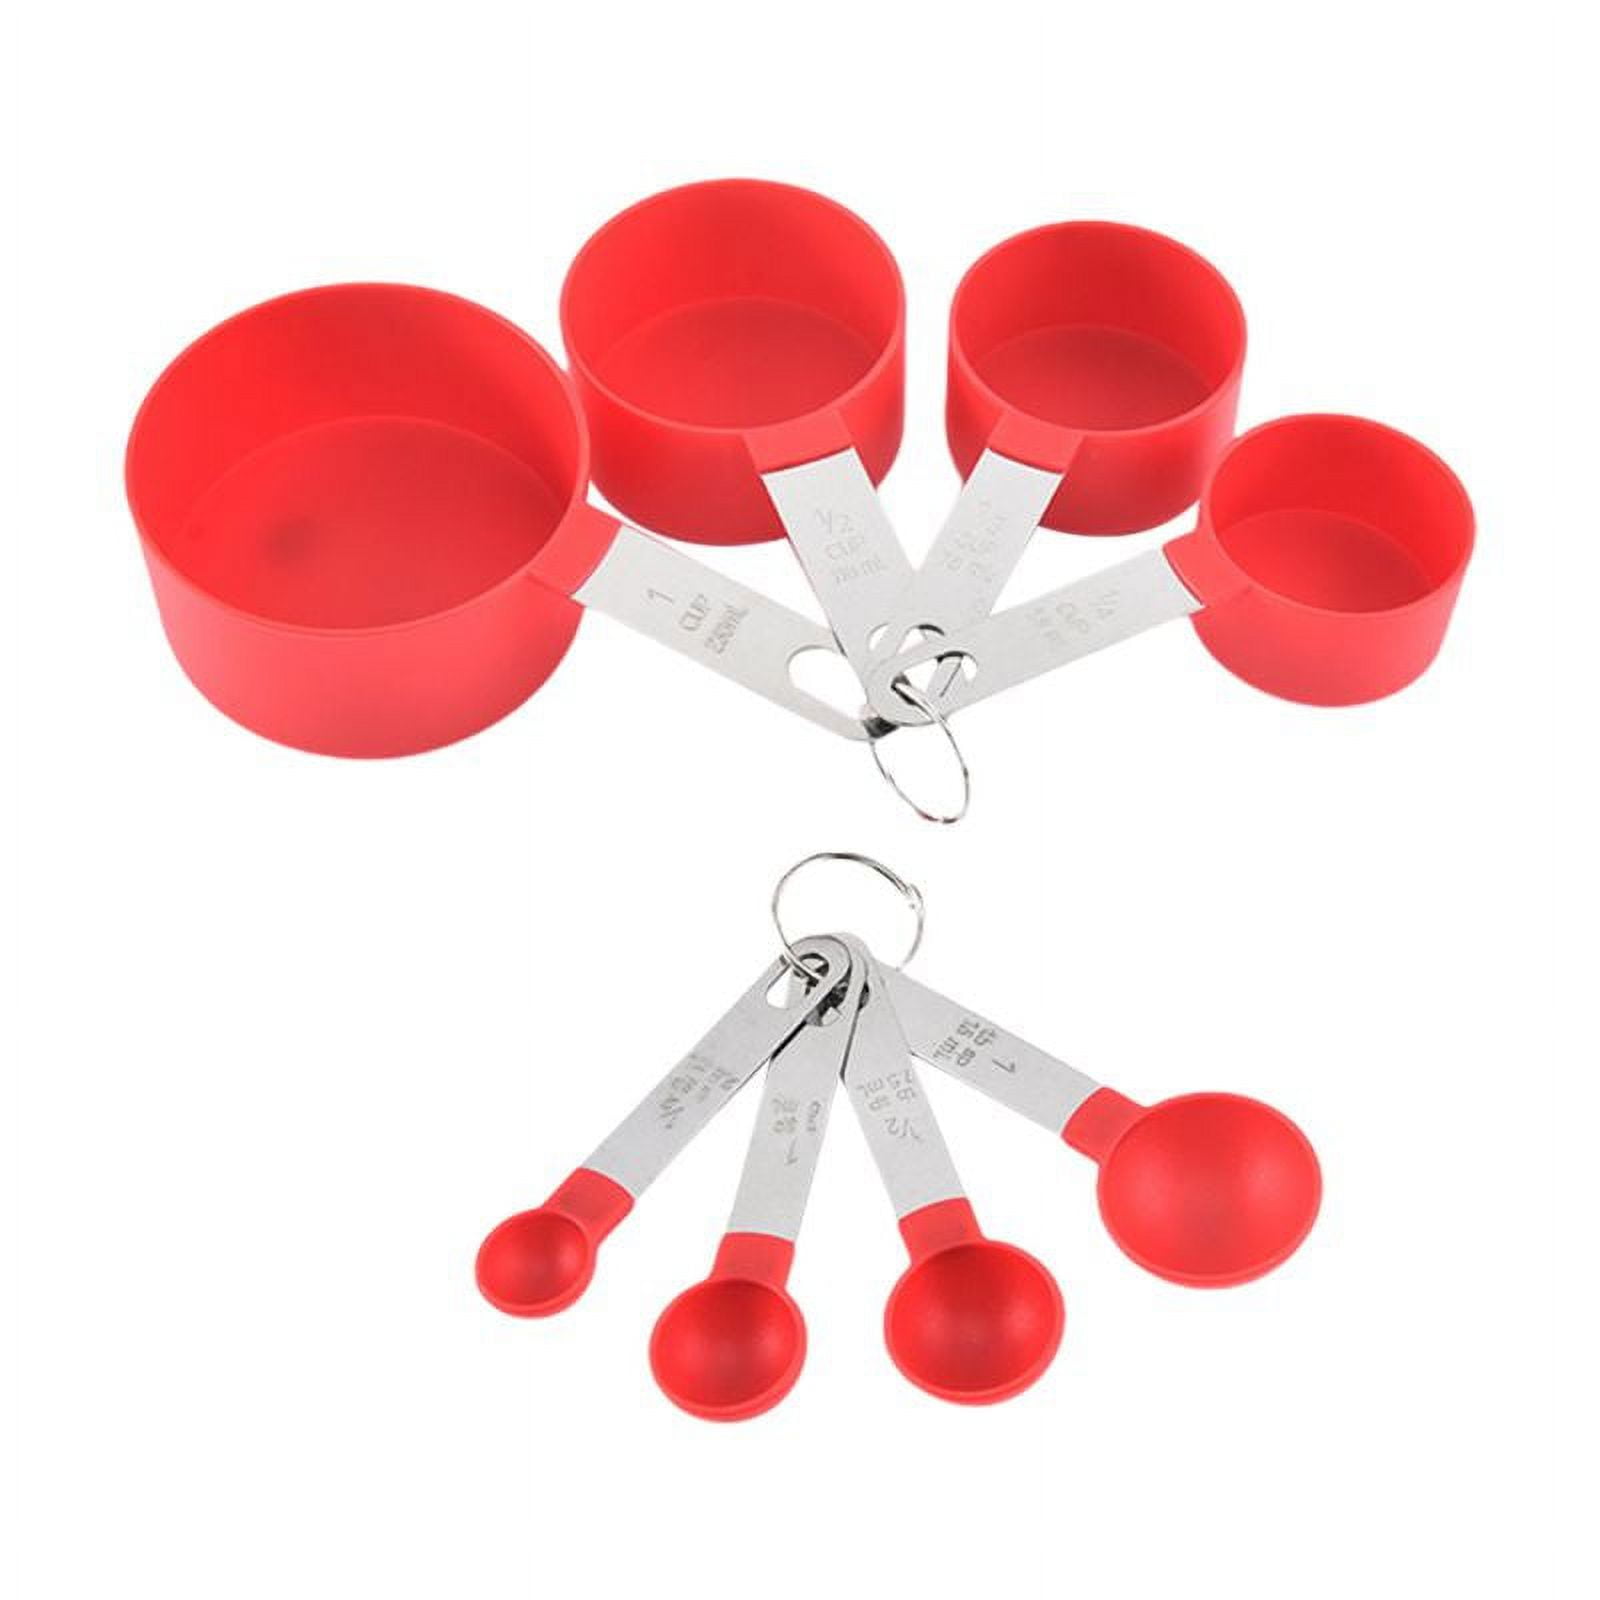 Kitchen Baking Plastic Measuring Spoon &cups Set For Dry Or Liquid (11 Pcs,  Red)